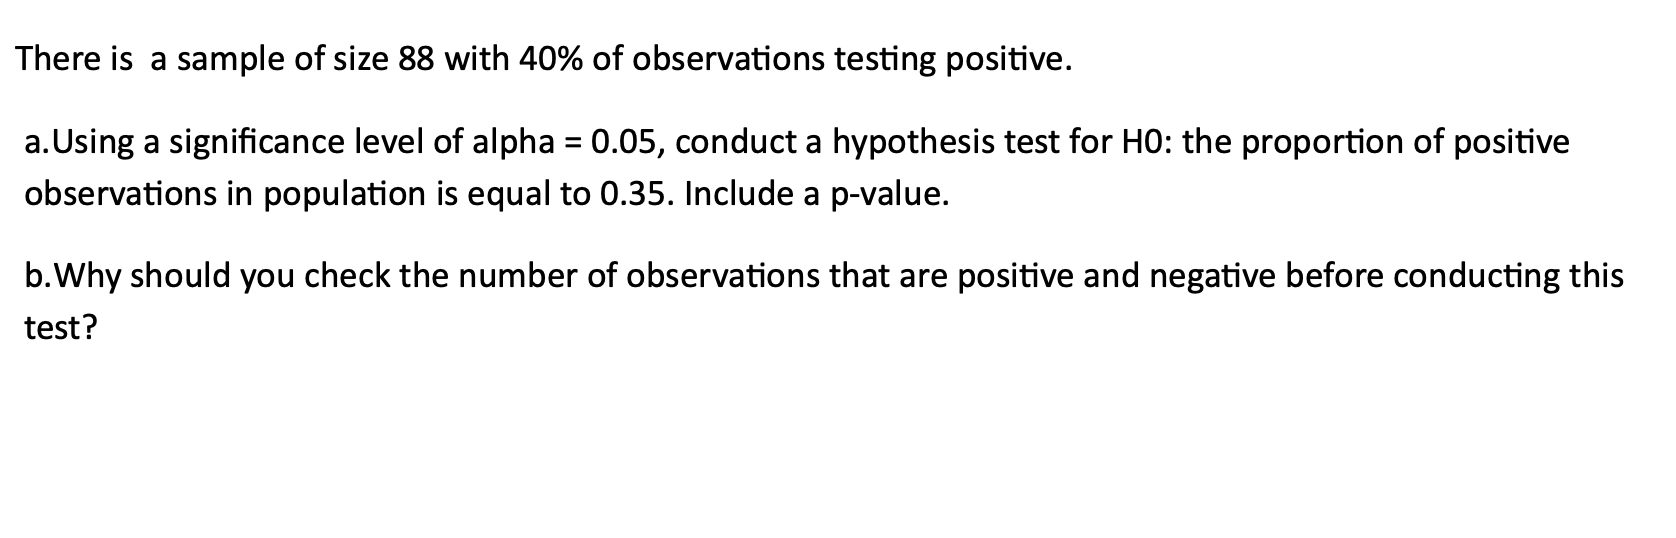 There Is A Sample Of Size 88 With 40 Of Observations Testing Positive A Using A Significance Level Of Alpha 0 05 Co 1